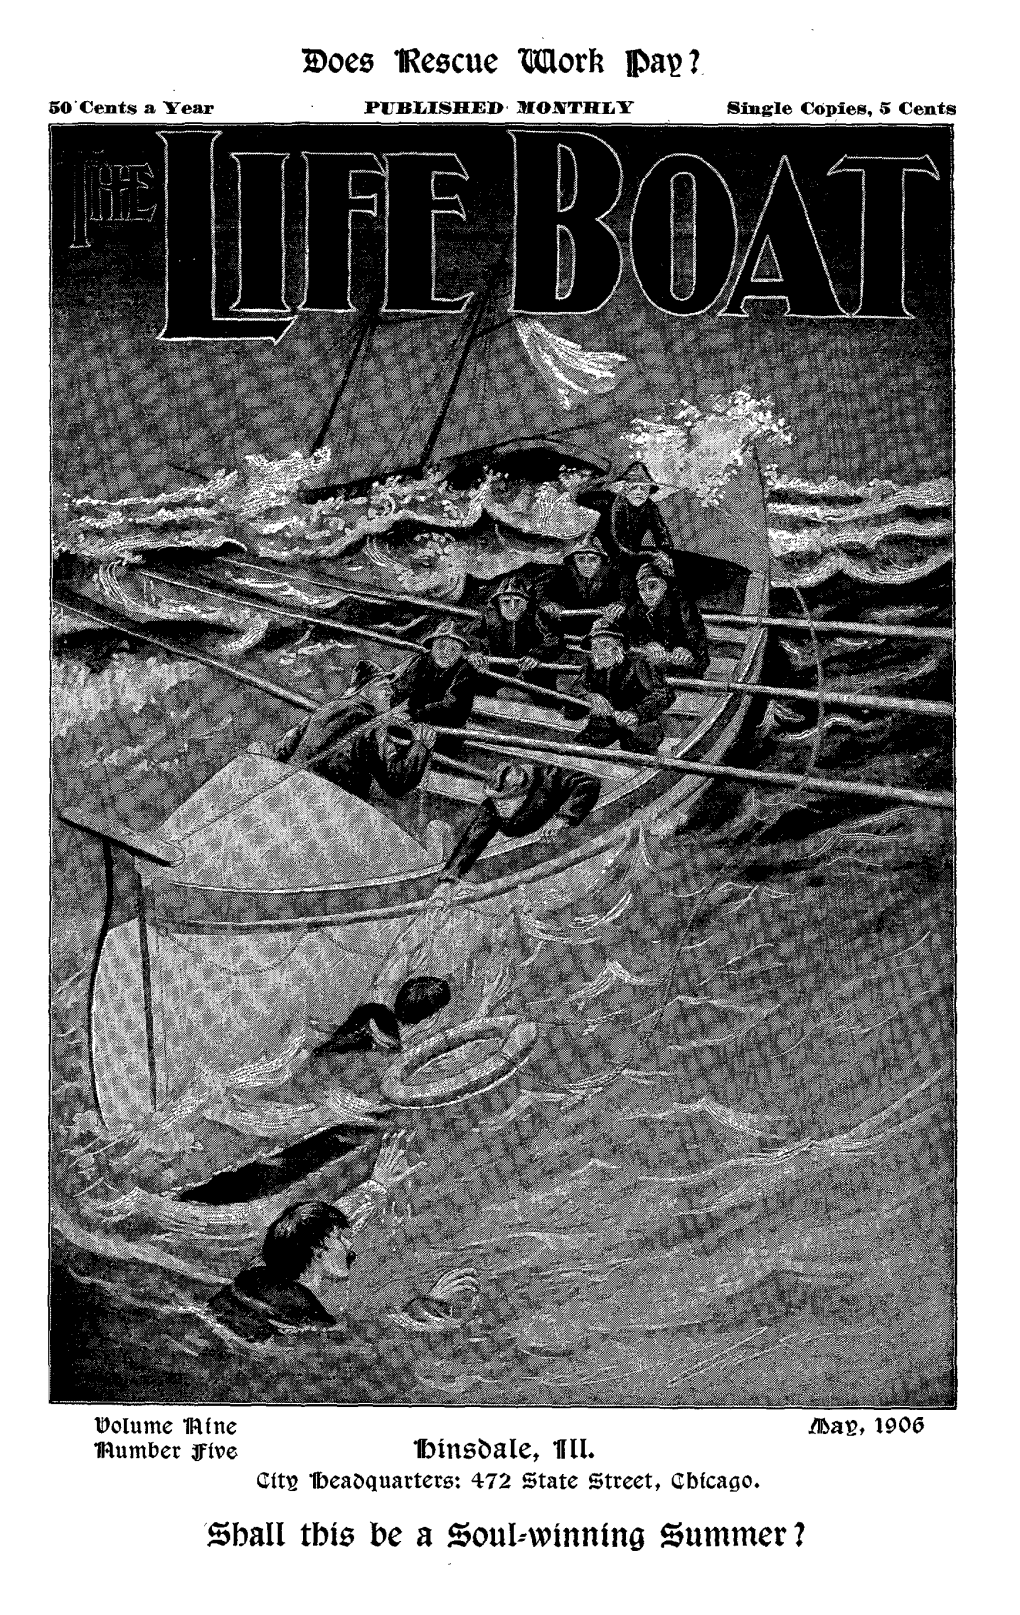 The Life Boat for 1906